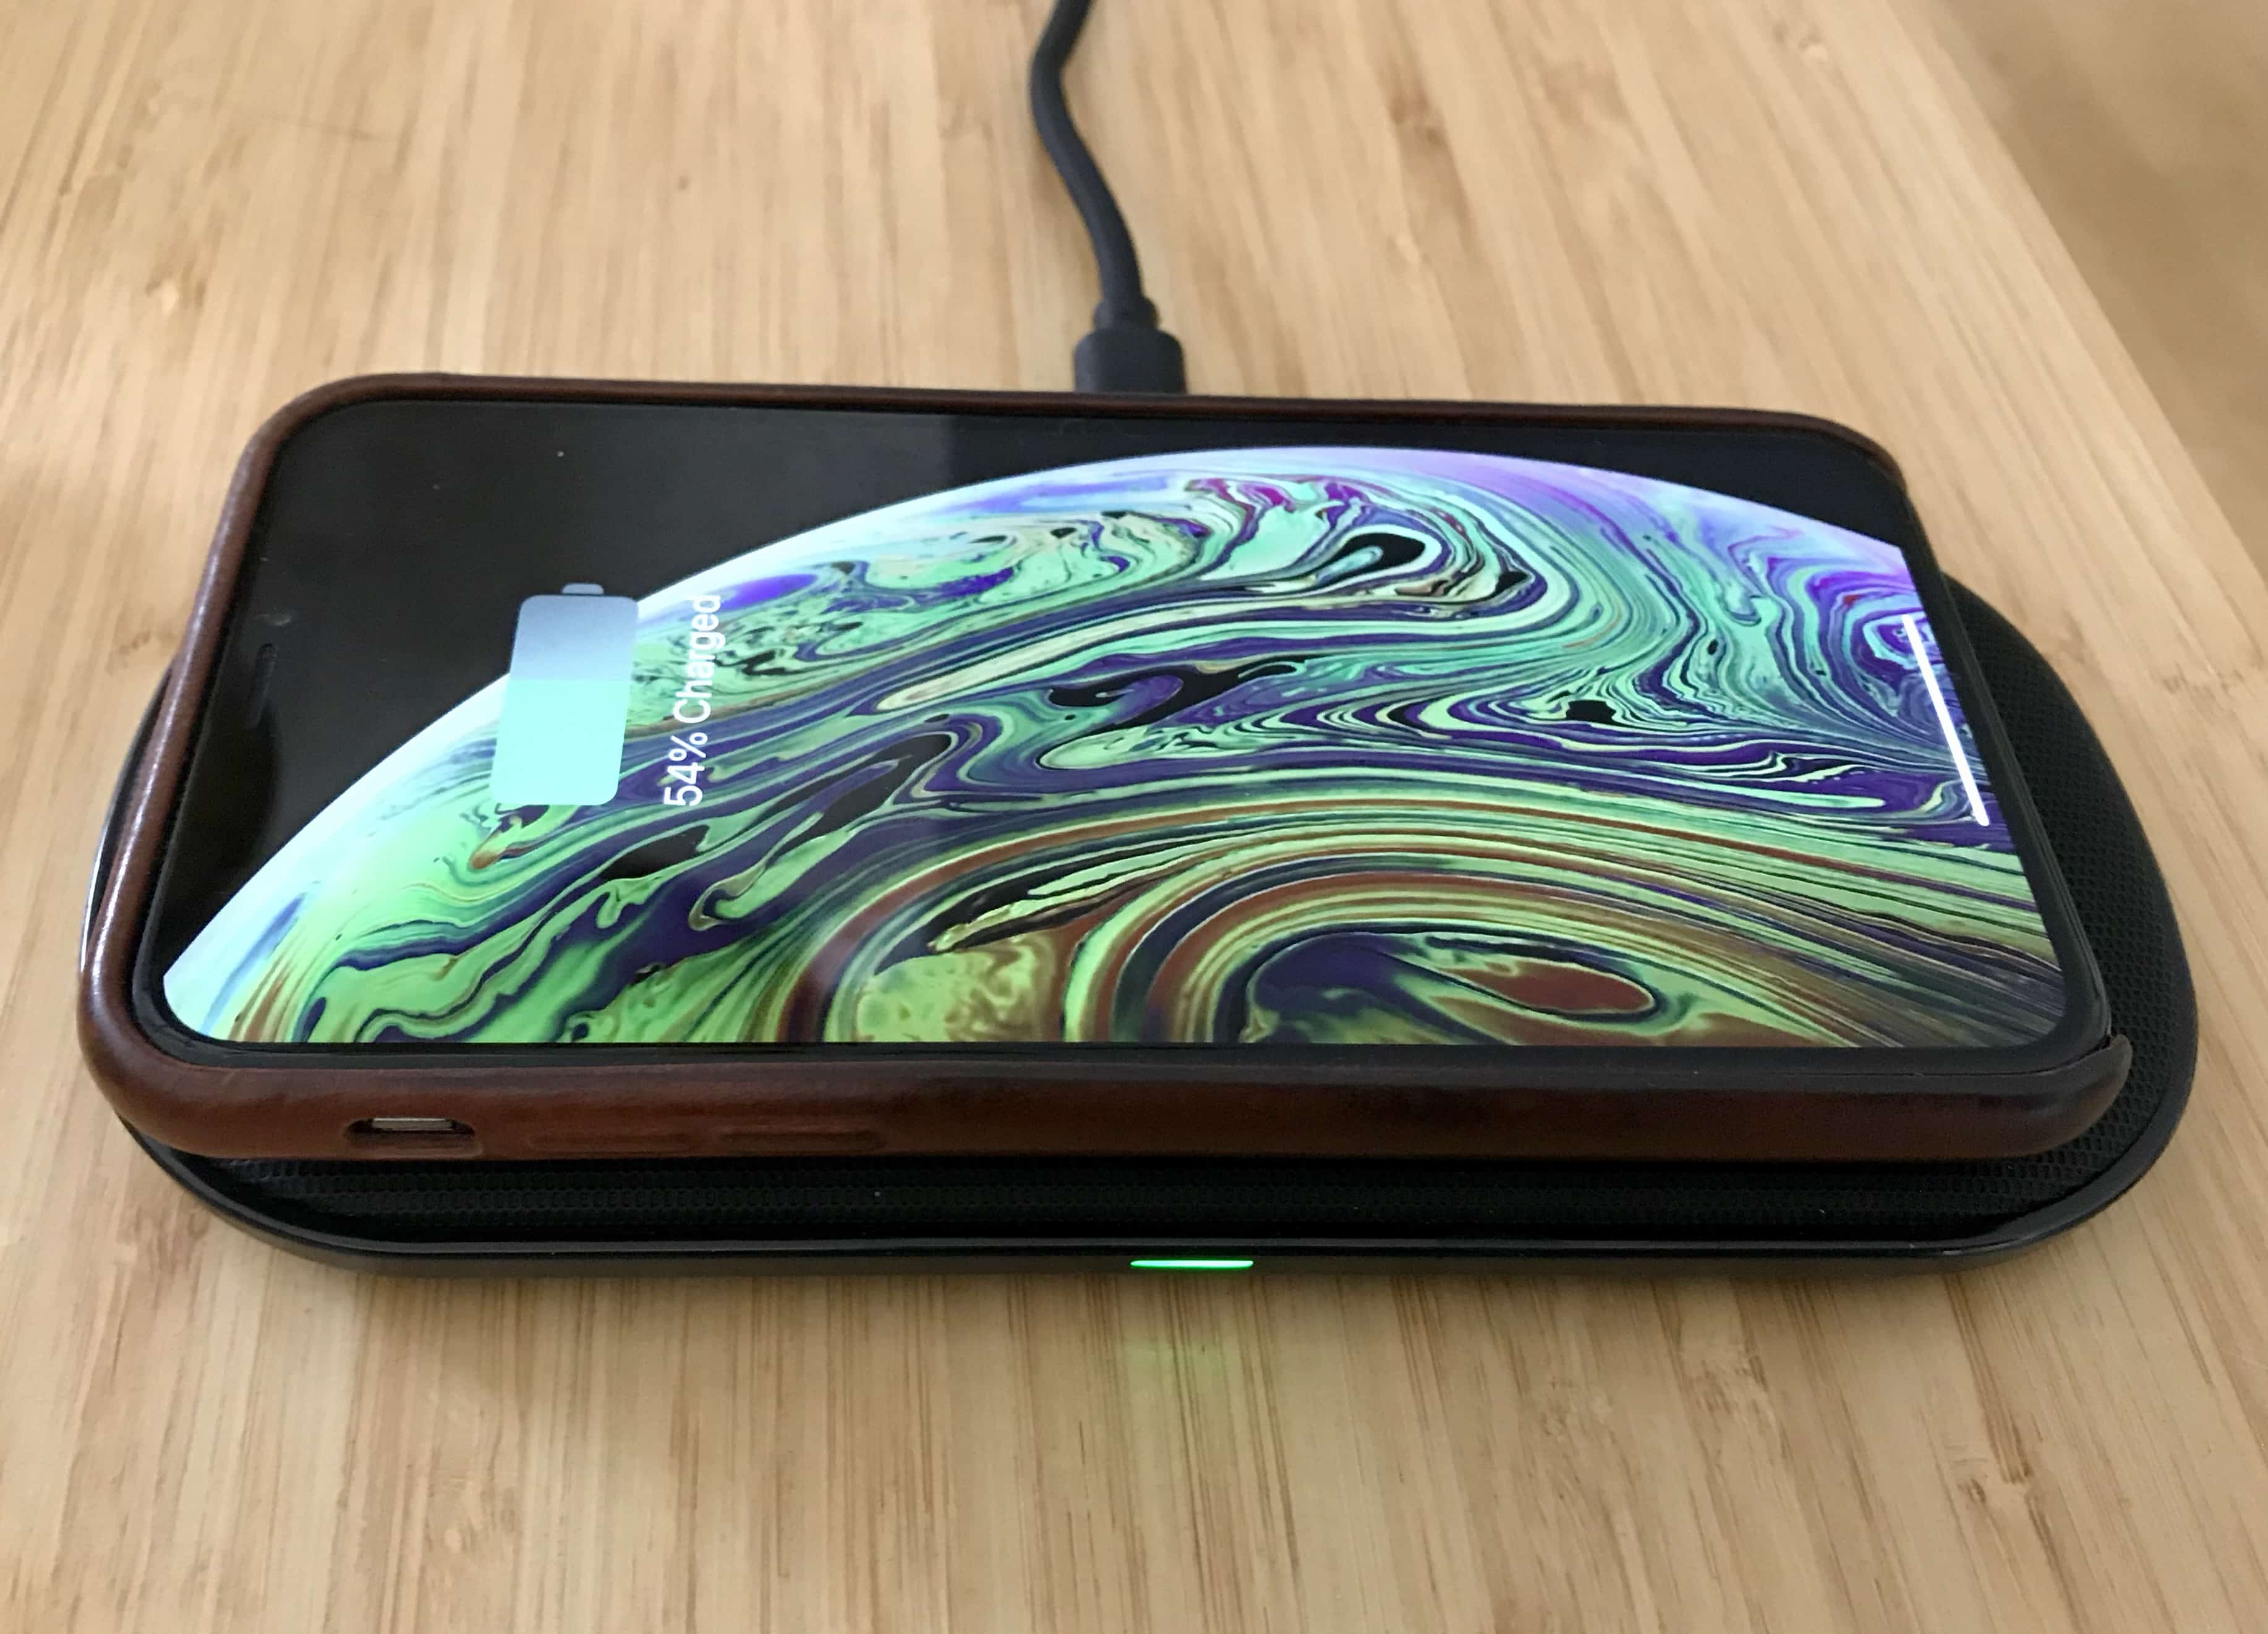 This week, we've got reviews of wireless chargers, Bluetooth speakers, iPad cases and more.